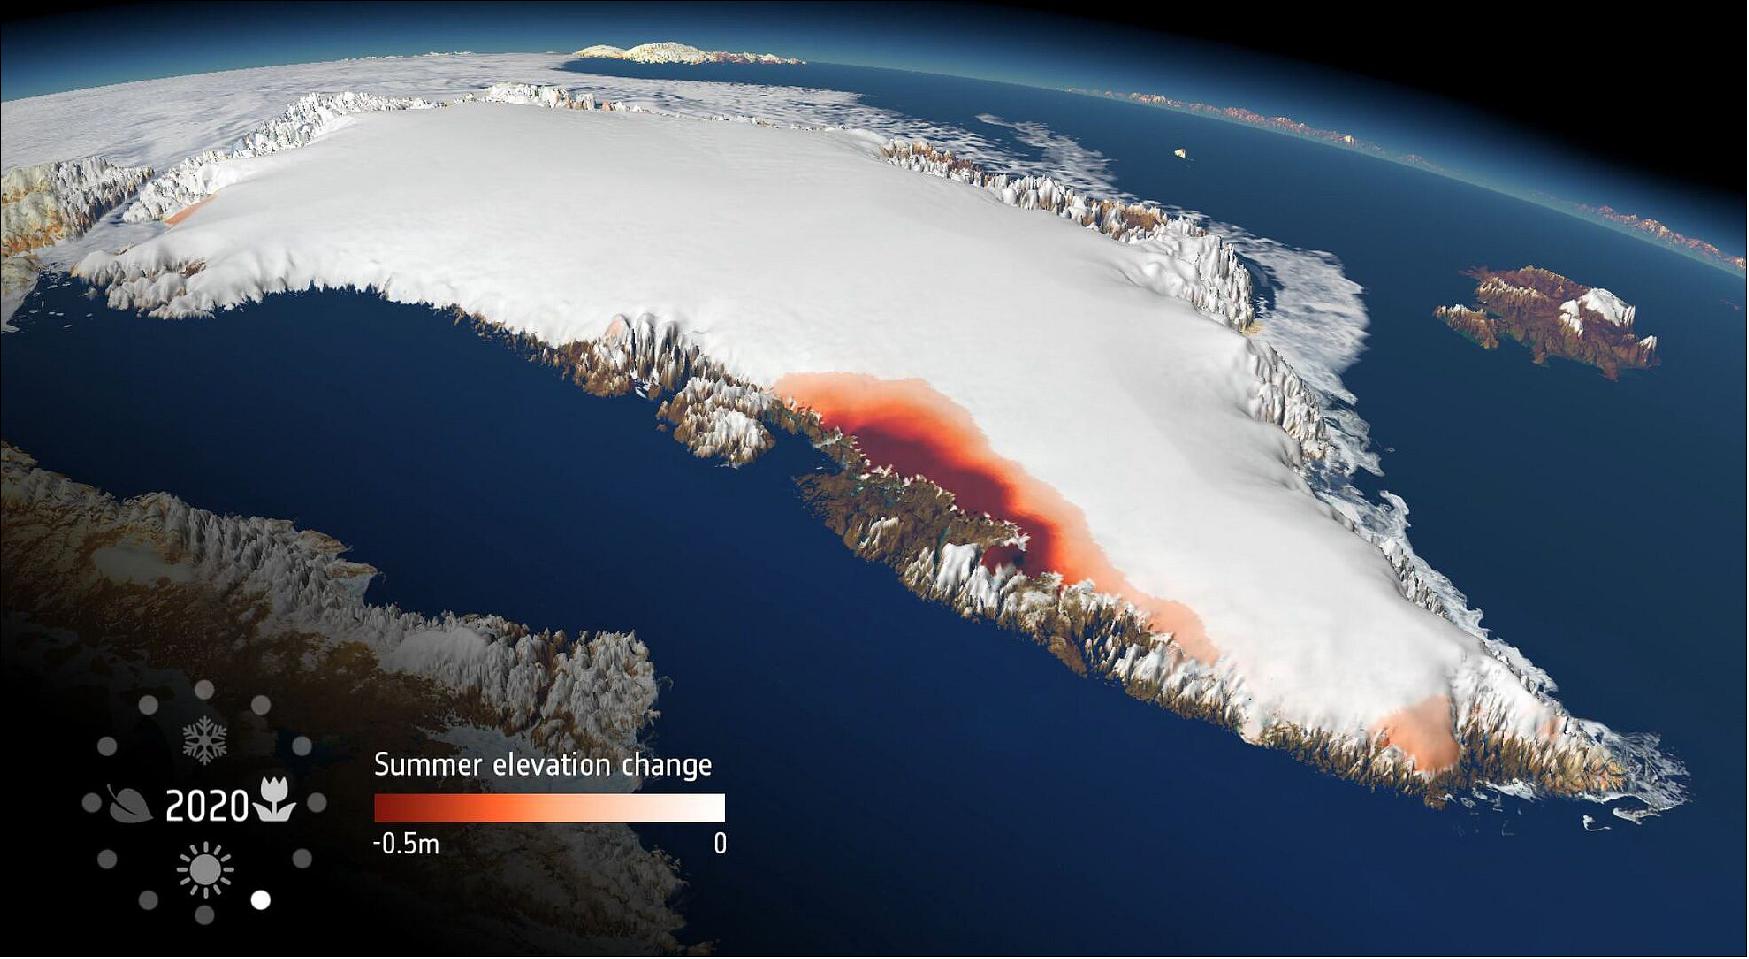 Figure 10: Greenland meltwater runoff. As world leaders and decision-makers join forces at COP26 to accelerate action towards the goals of the Paris Agreement, new research, again, highlights the value of satellite data in understanding and monitoring climate change. This particular new research, which is based on measurements from ESA's CryoSat mission, shows that extreme ice melting events in Greenland have become more frequent and more intense over the past 40 years, raising sea levels and the risk of flooding worldwide (image credit: ESA/Planetary Visions)